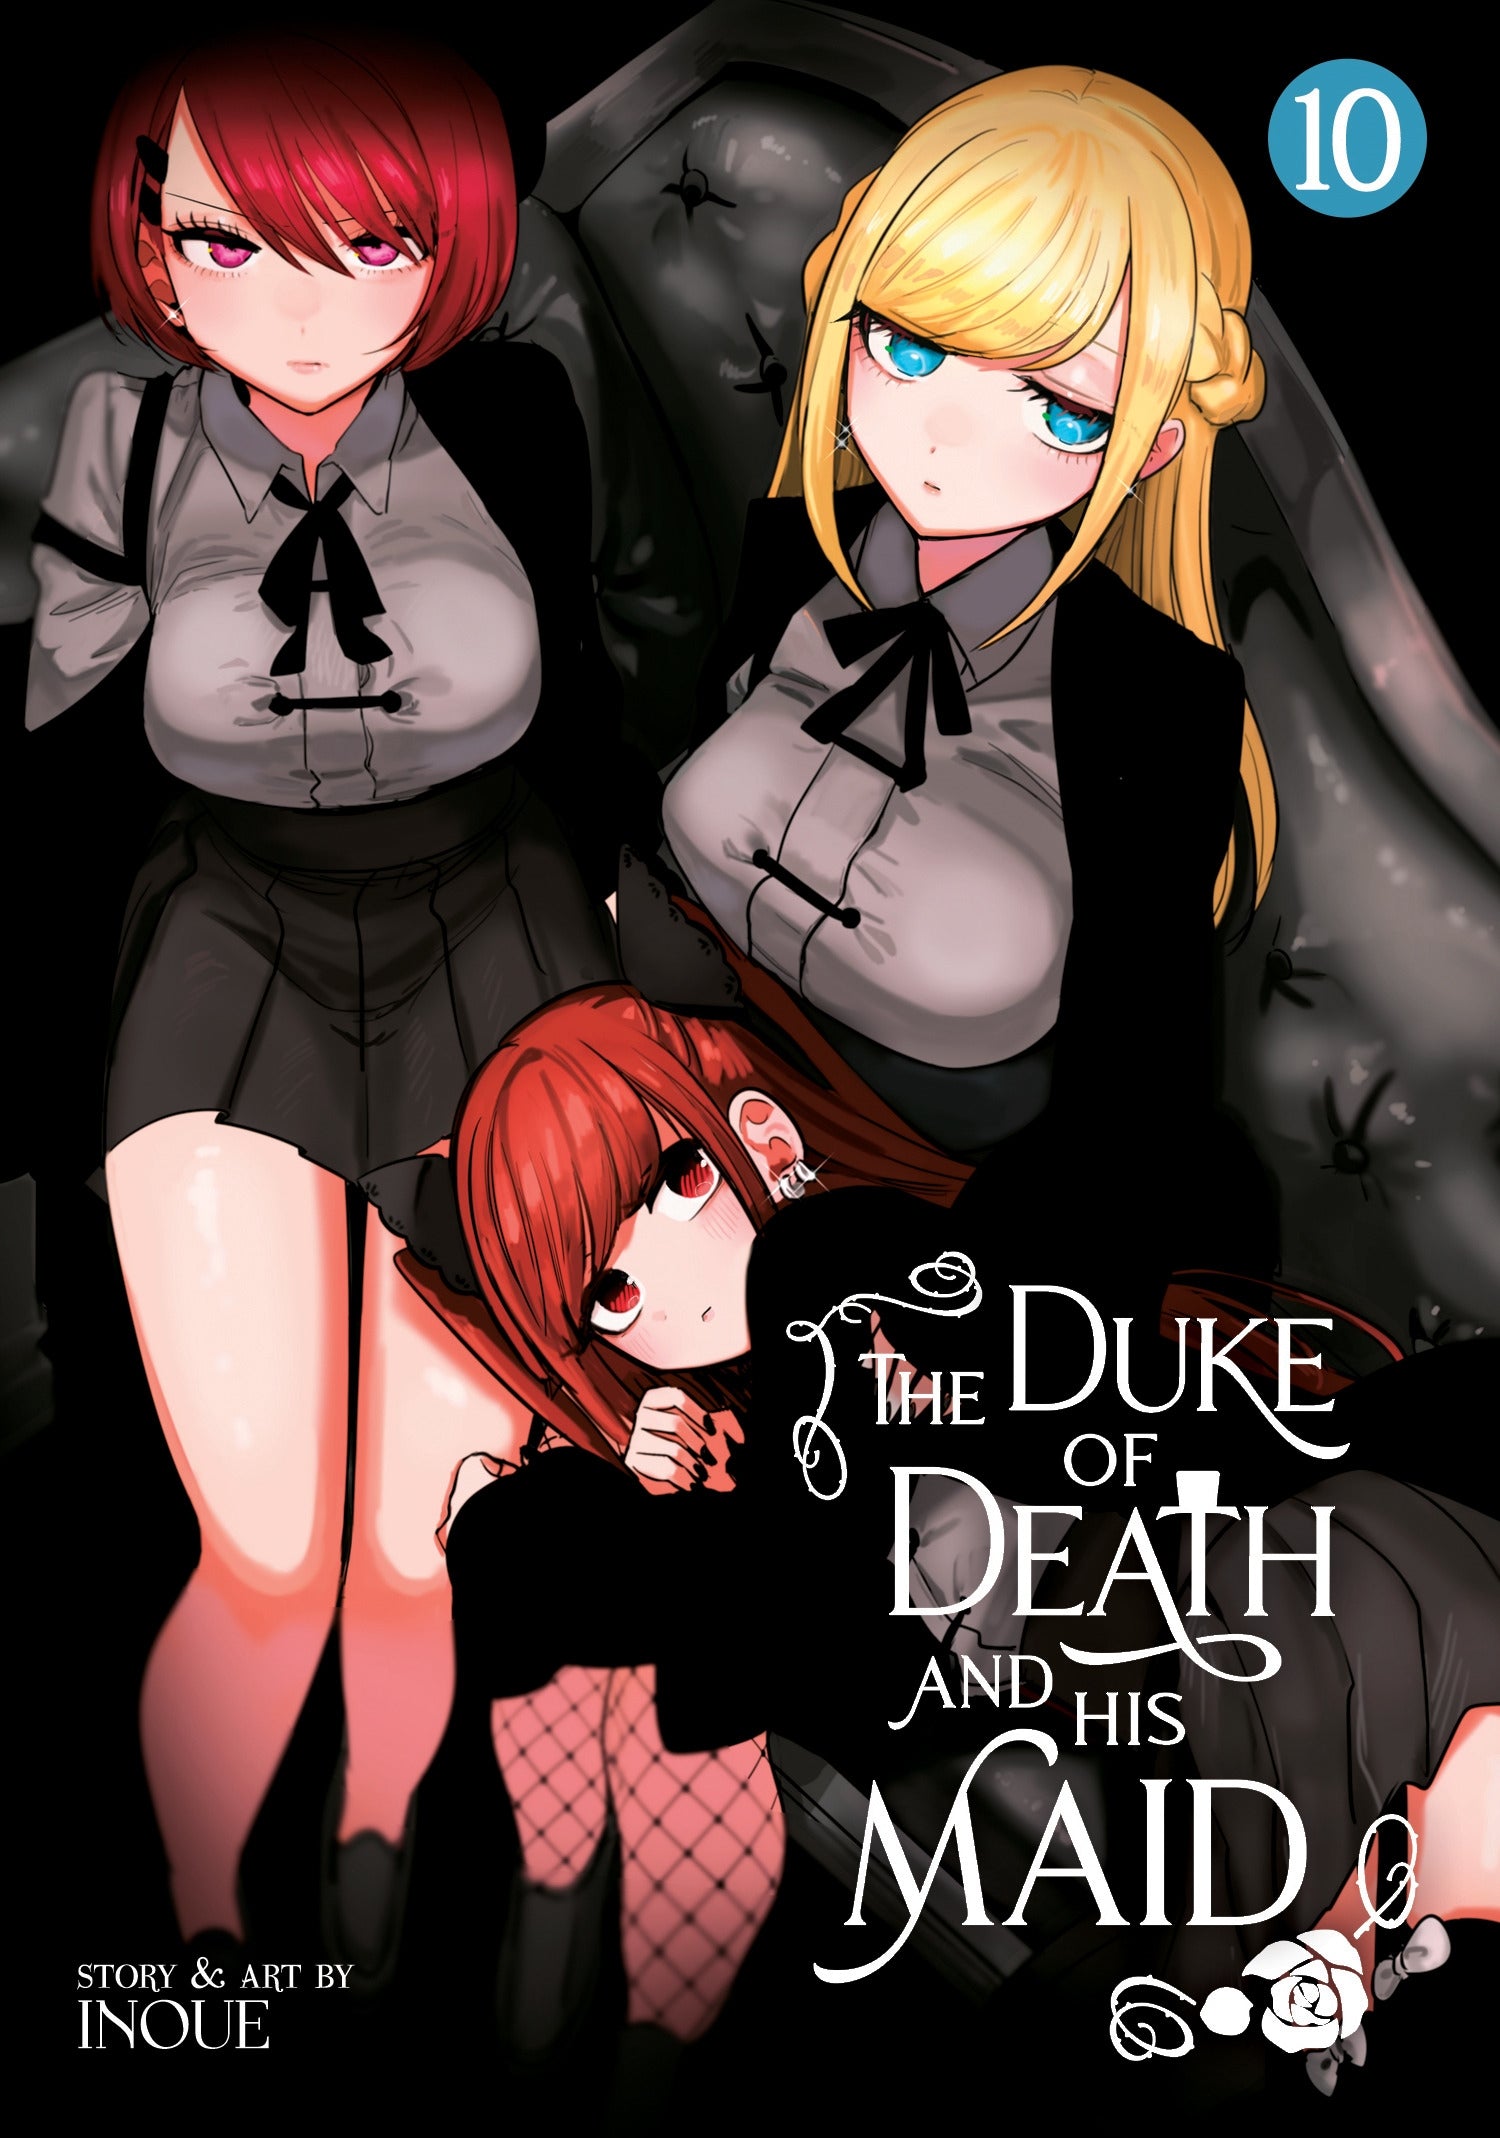 The Duke of Death and His Maid, Vol. 10